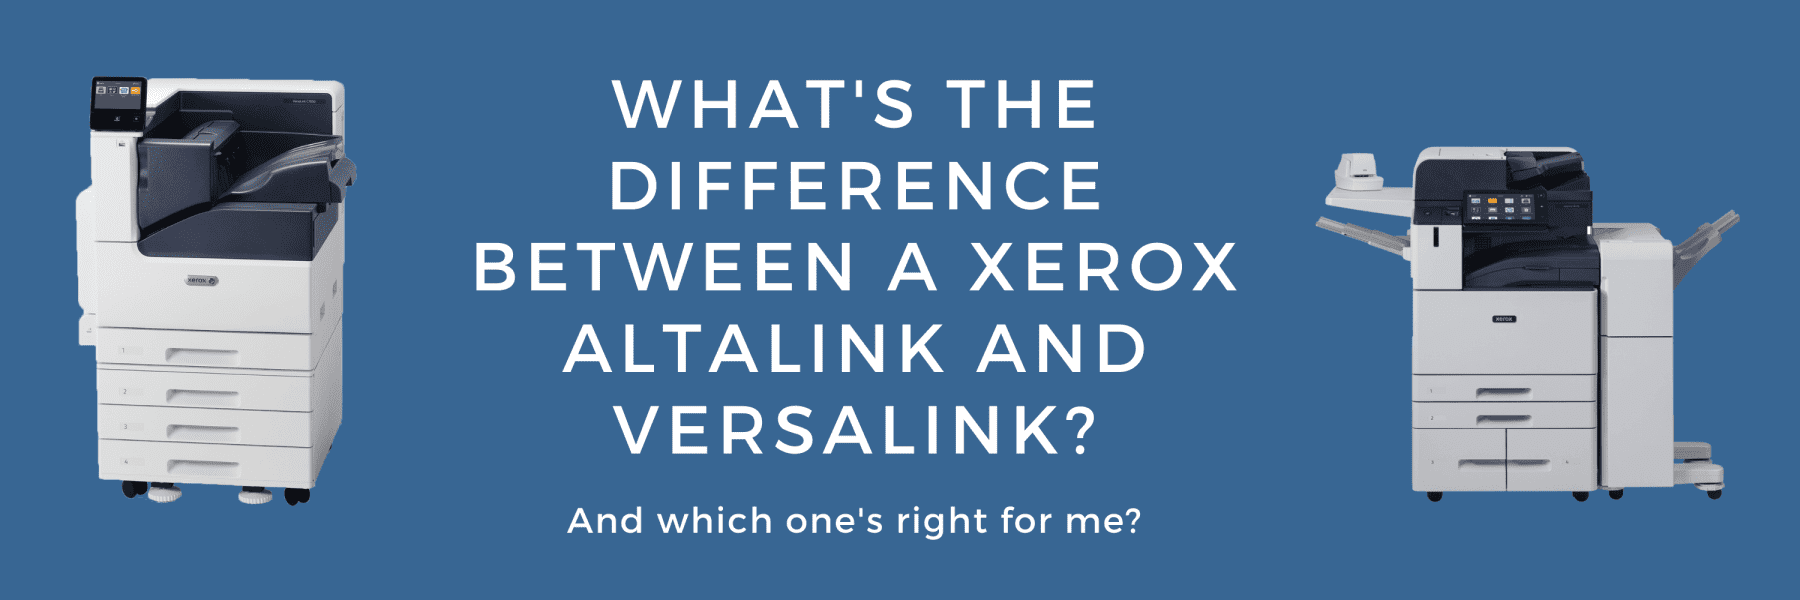 What's the Difference Between a Xerox AltaLink and Xerox VersaLink graphic